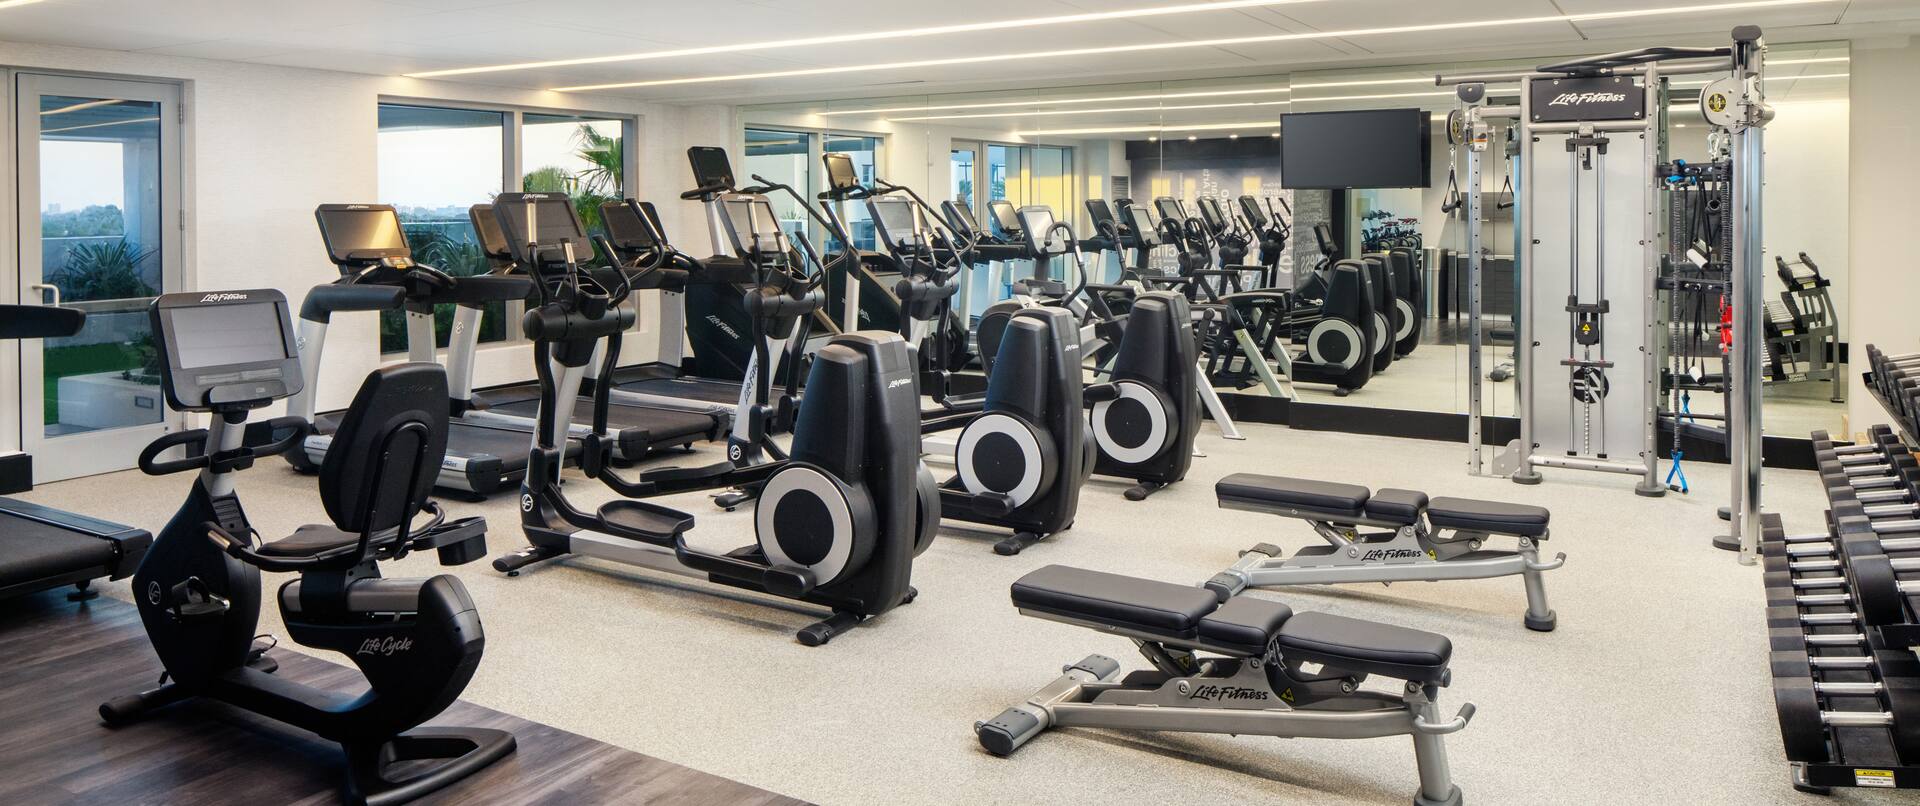 Fitness Center with Exercise Bikes and Weights